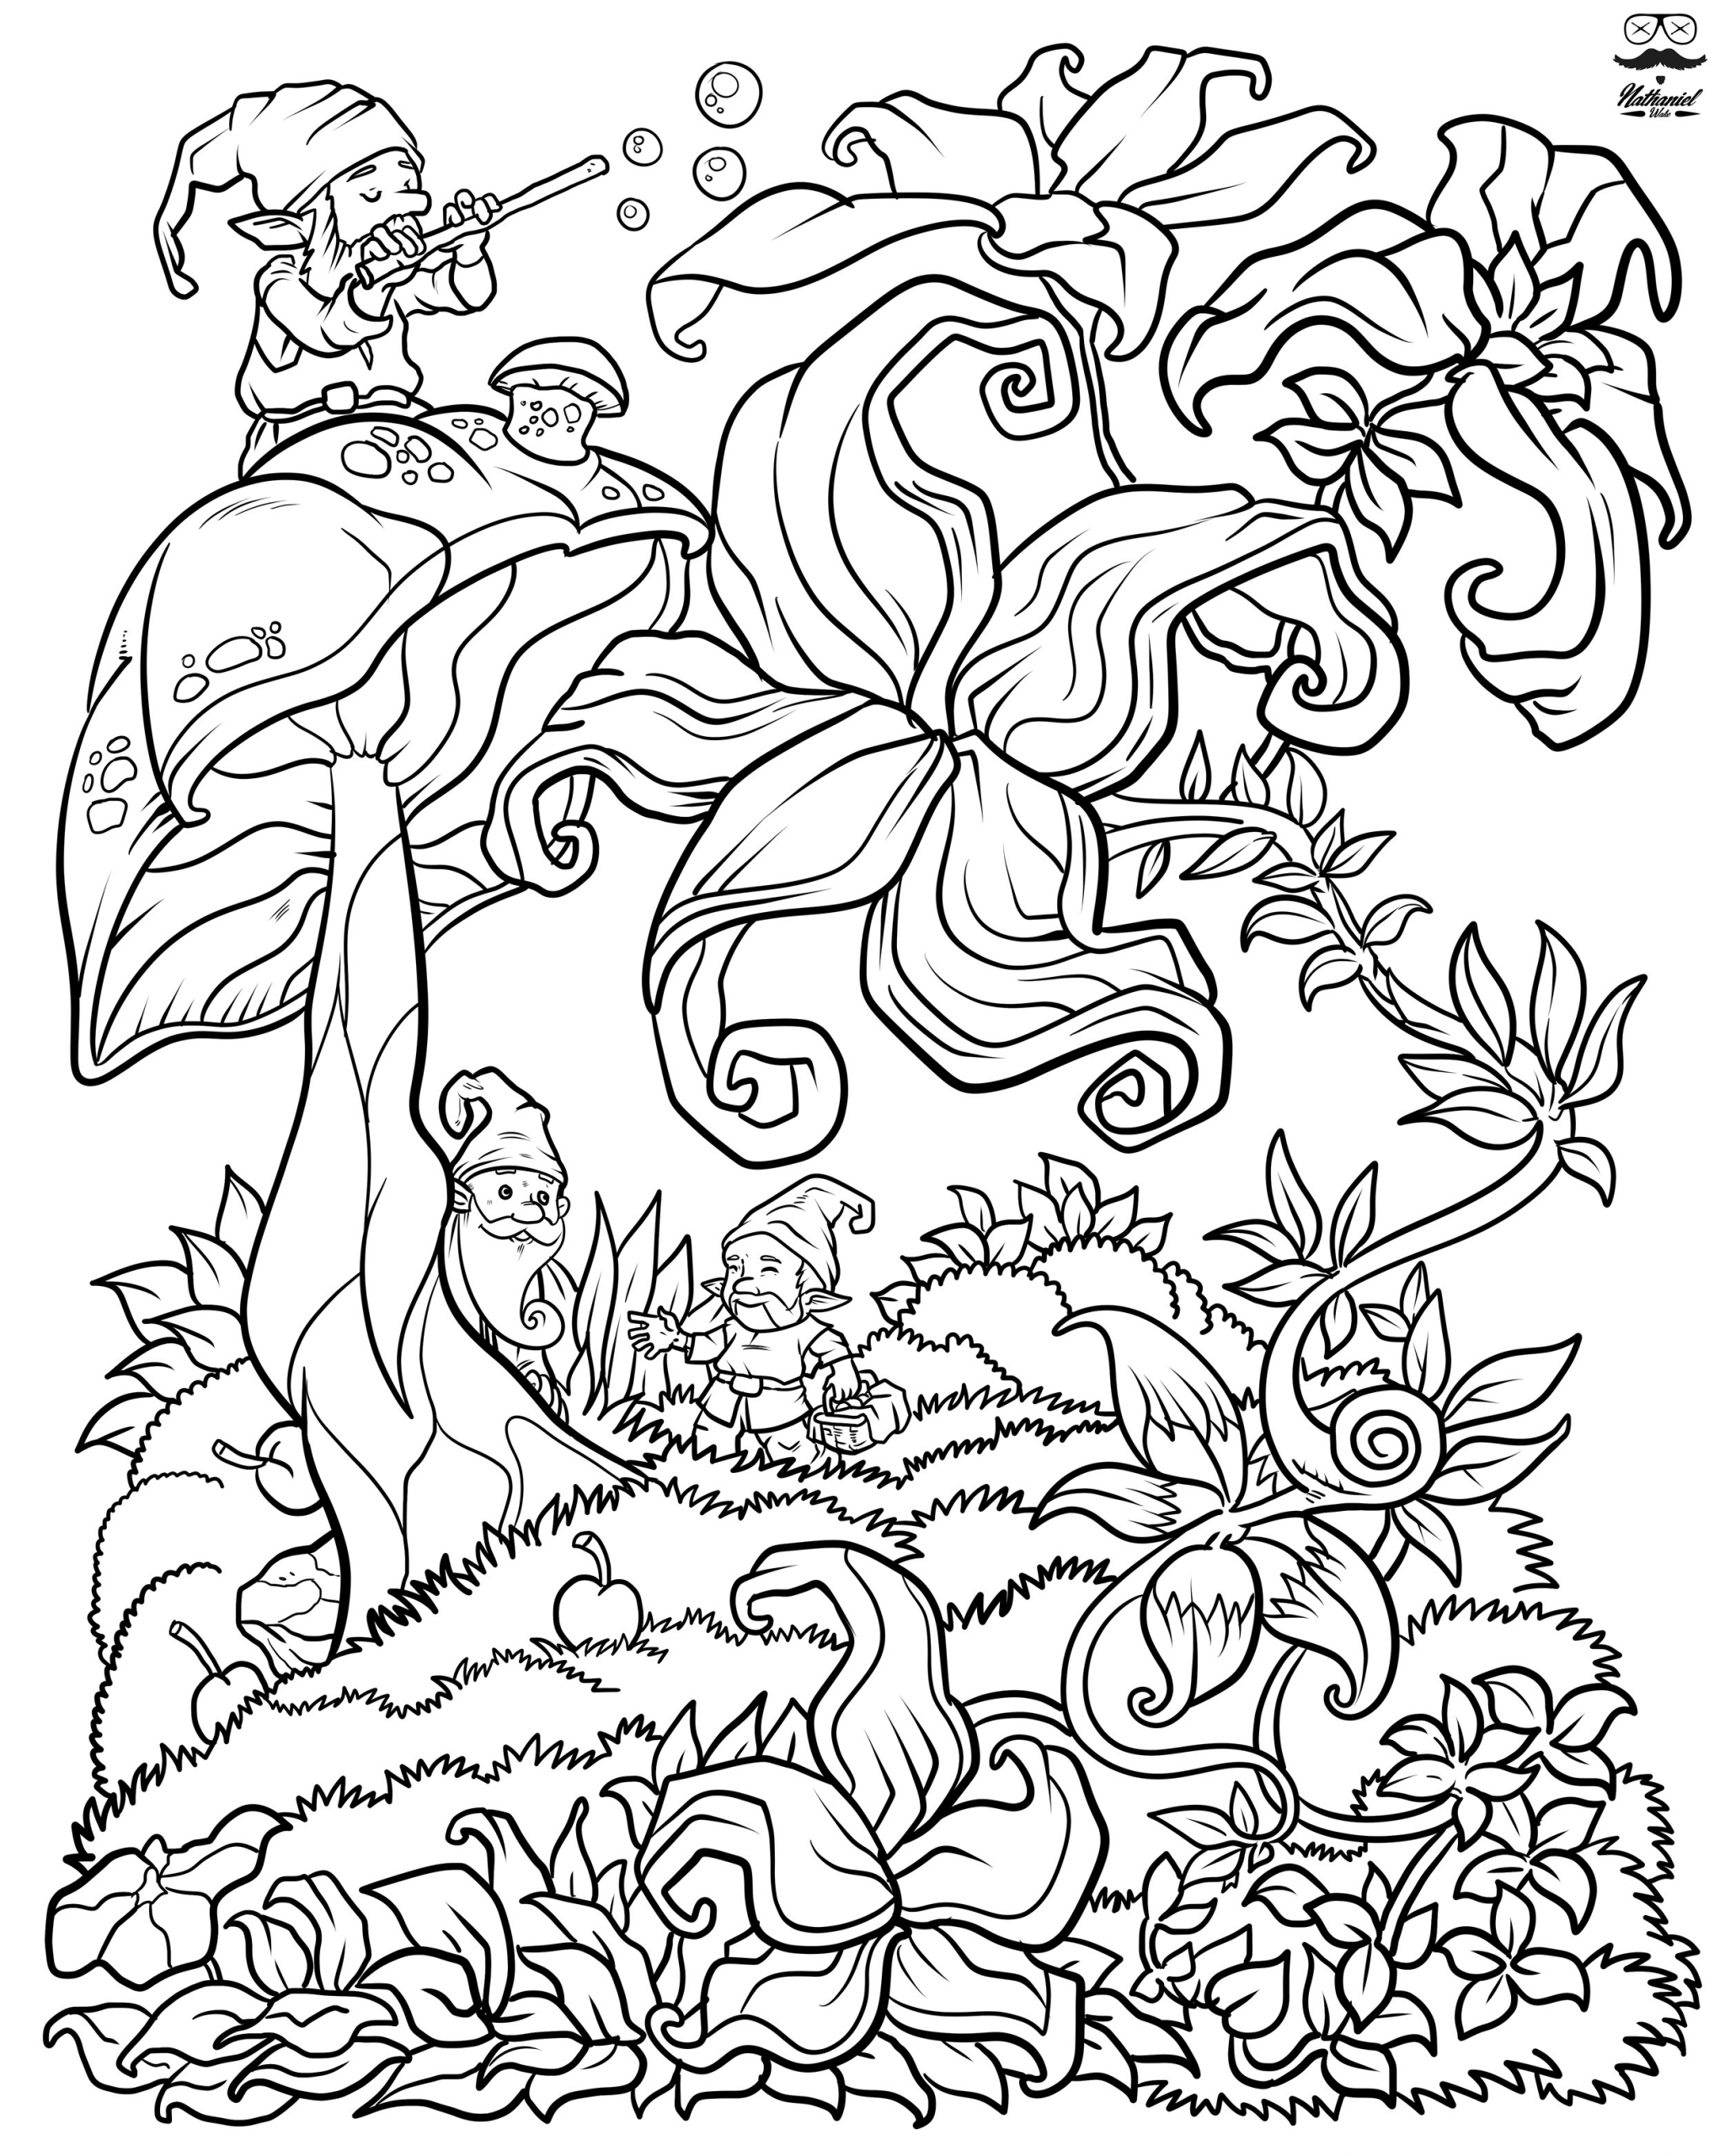 Coloring Book For Adults
 Floral Fantasy Digital Version Adult Coloring Book